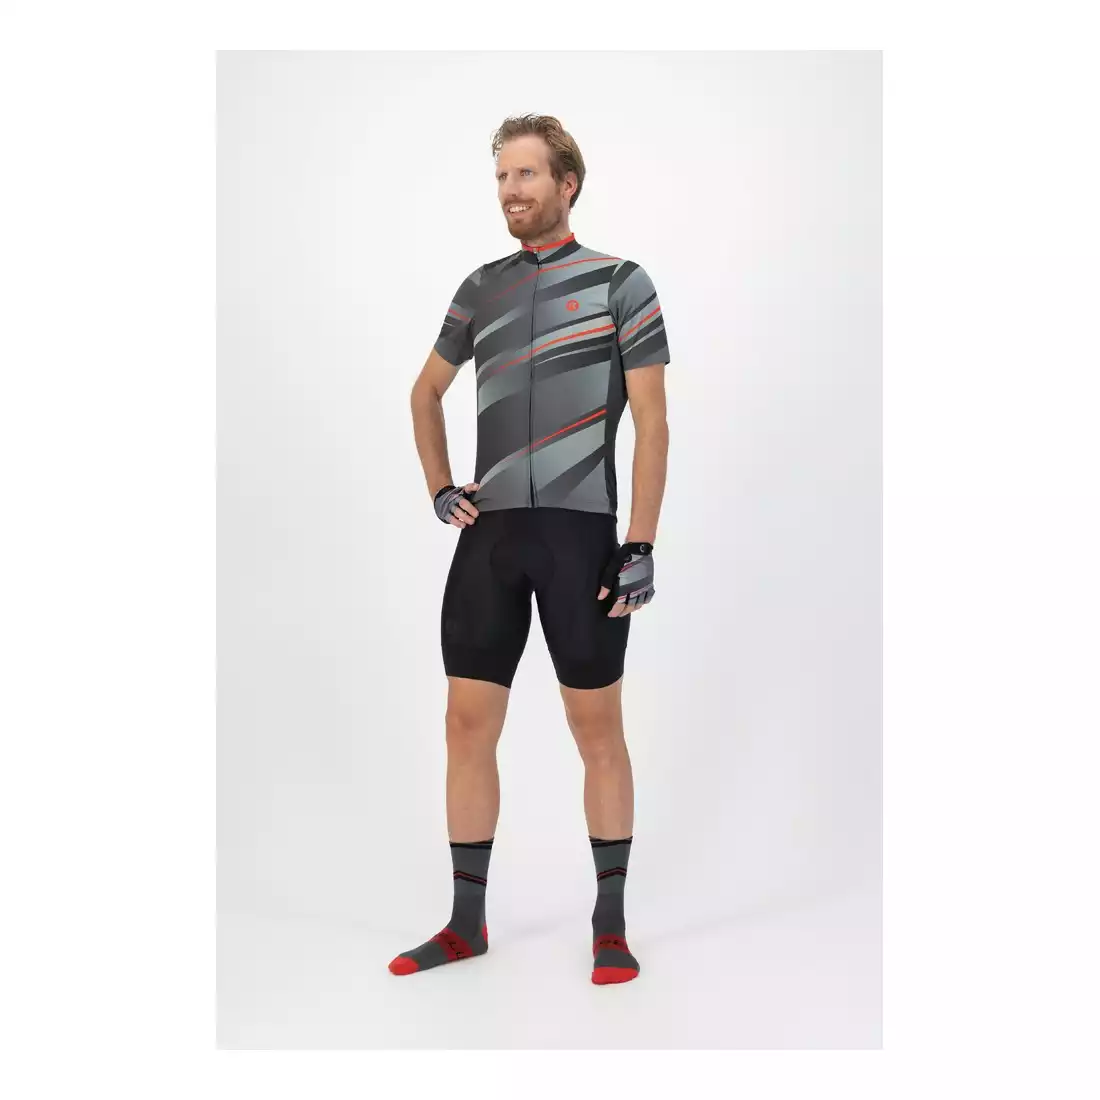 ROGELLI BUZZ Men's cycling jersey, gray and red